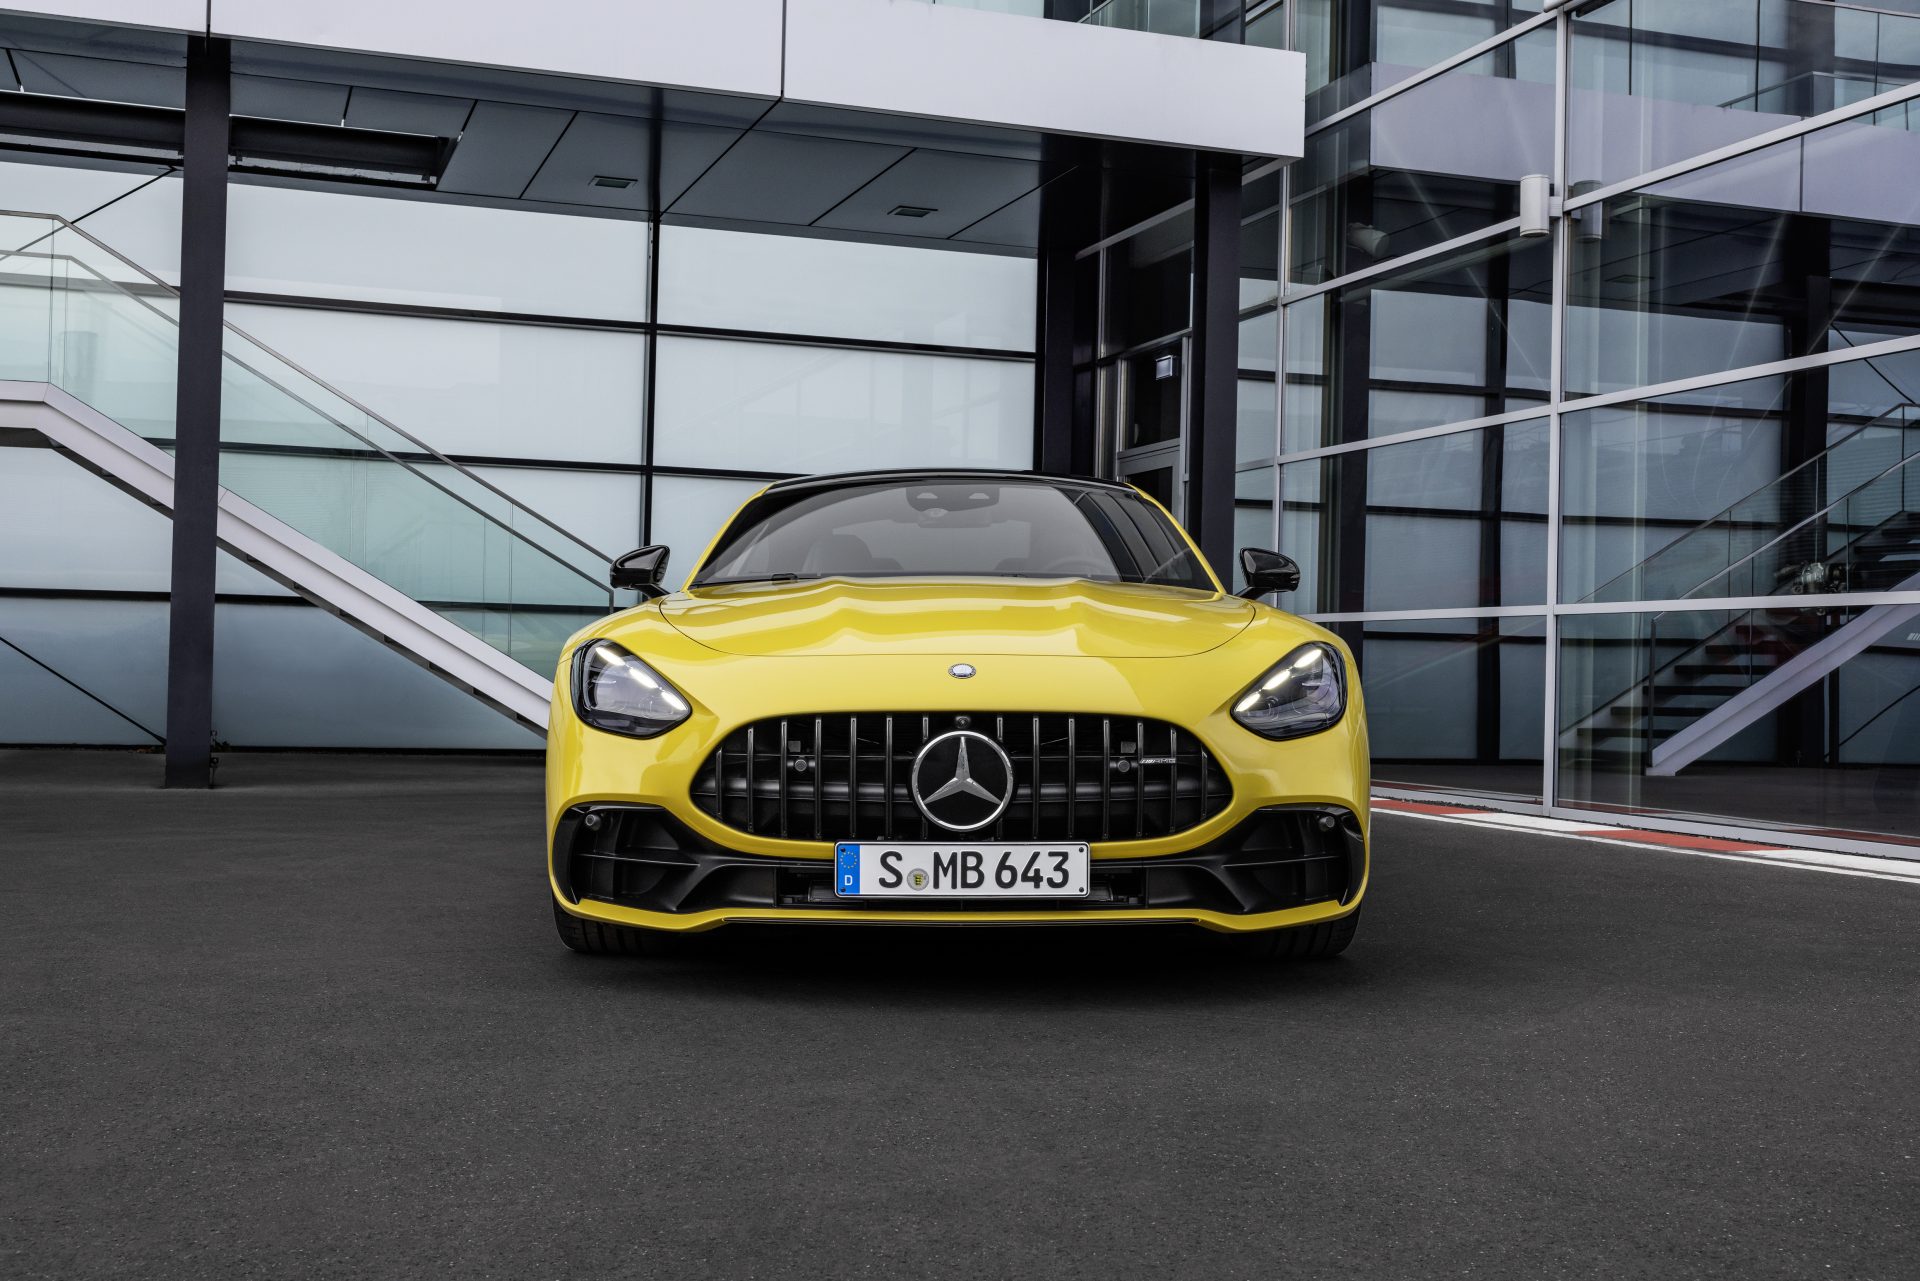 Mercedes Amg Gt 43 Coupe (11)